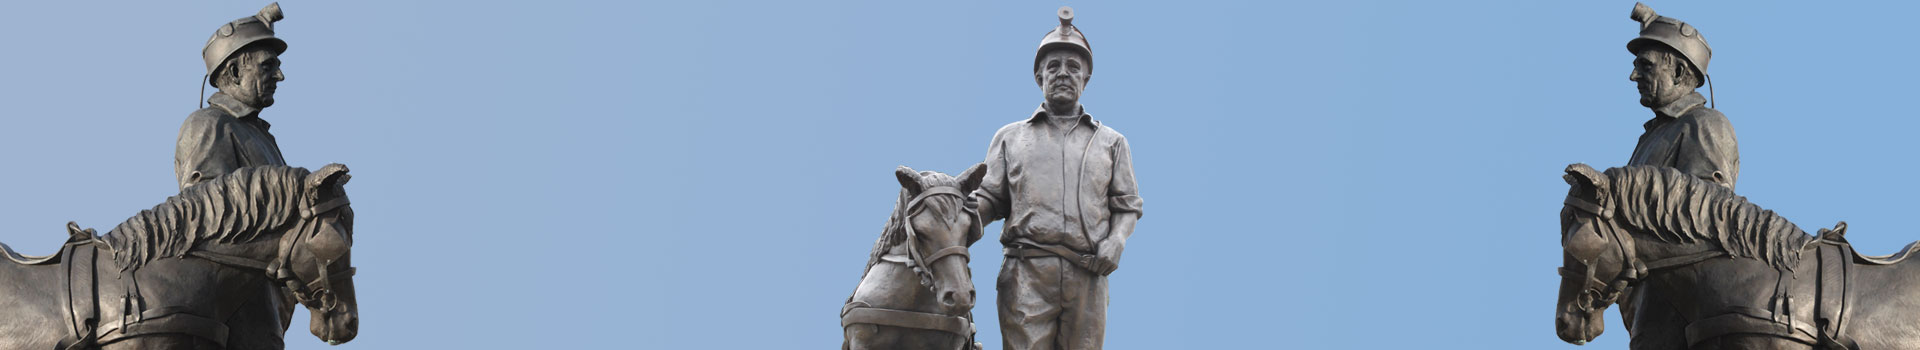 Burntwood miner and pit pony statue